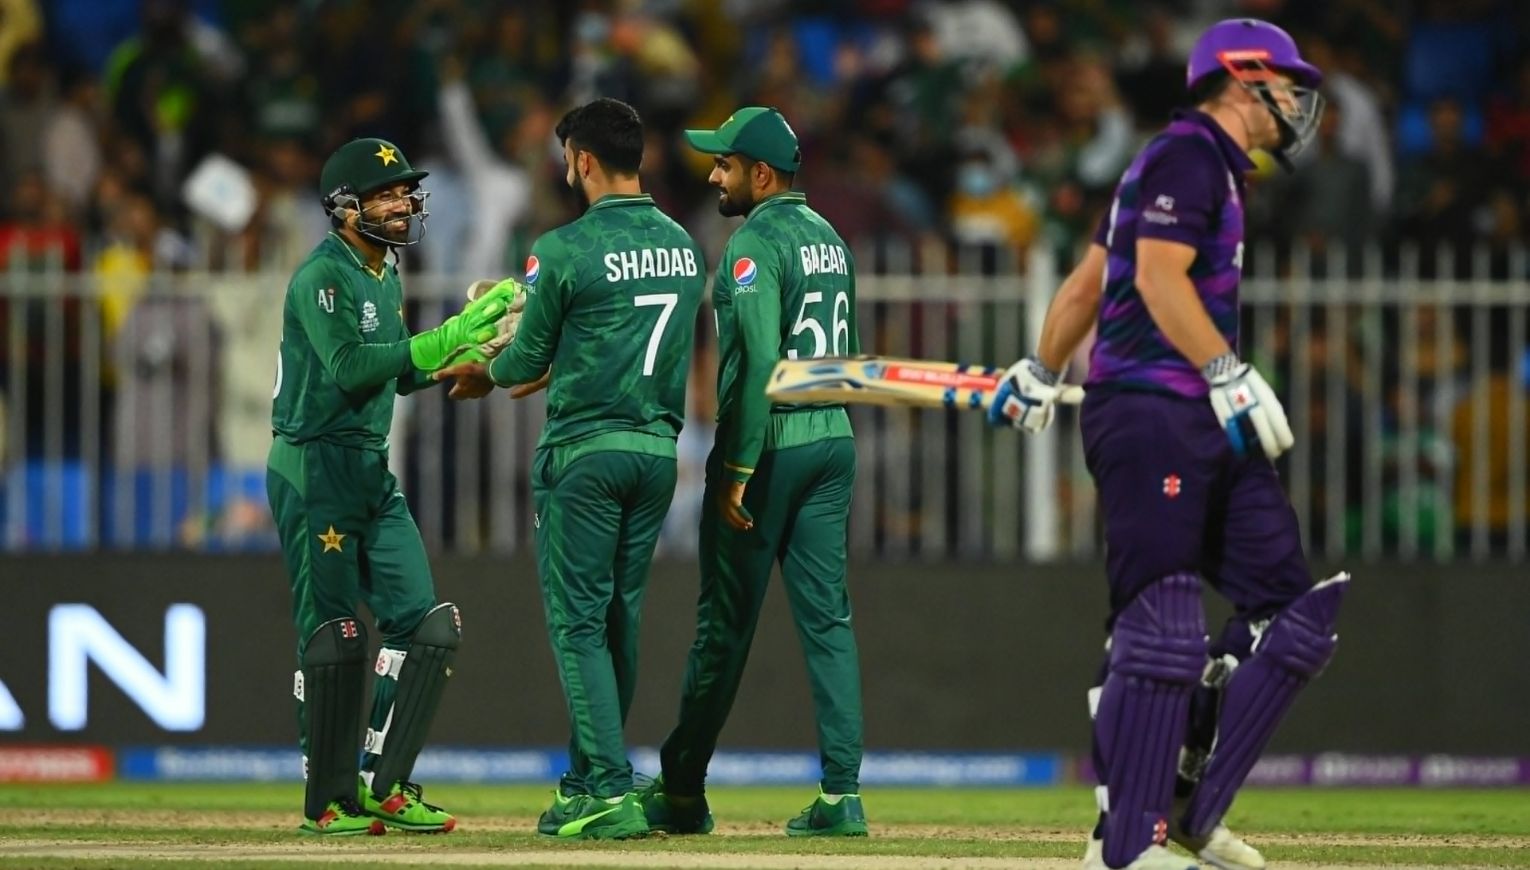 T20 World Cup | Clinical Pakistan breeze past Scotland, enter semis as the only unbeaten side